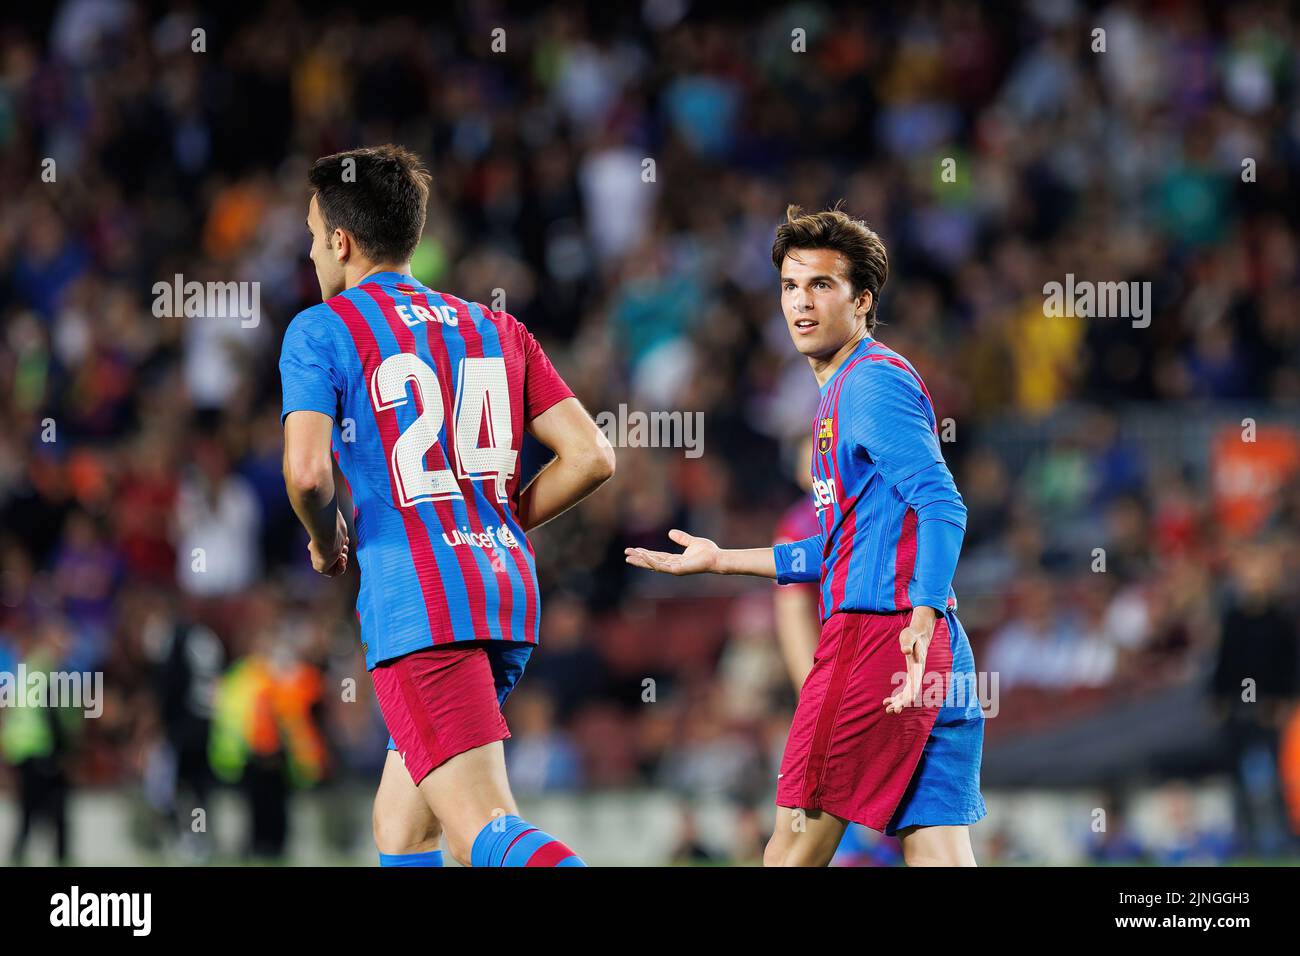 BARCELONA - MAY 10: Riqui Puig in action during the La Liga match between FC Barcelona and Real Club Celta de Vigo at the Camp Nou Stadium on May 10, Stock Photo